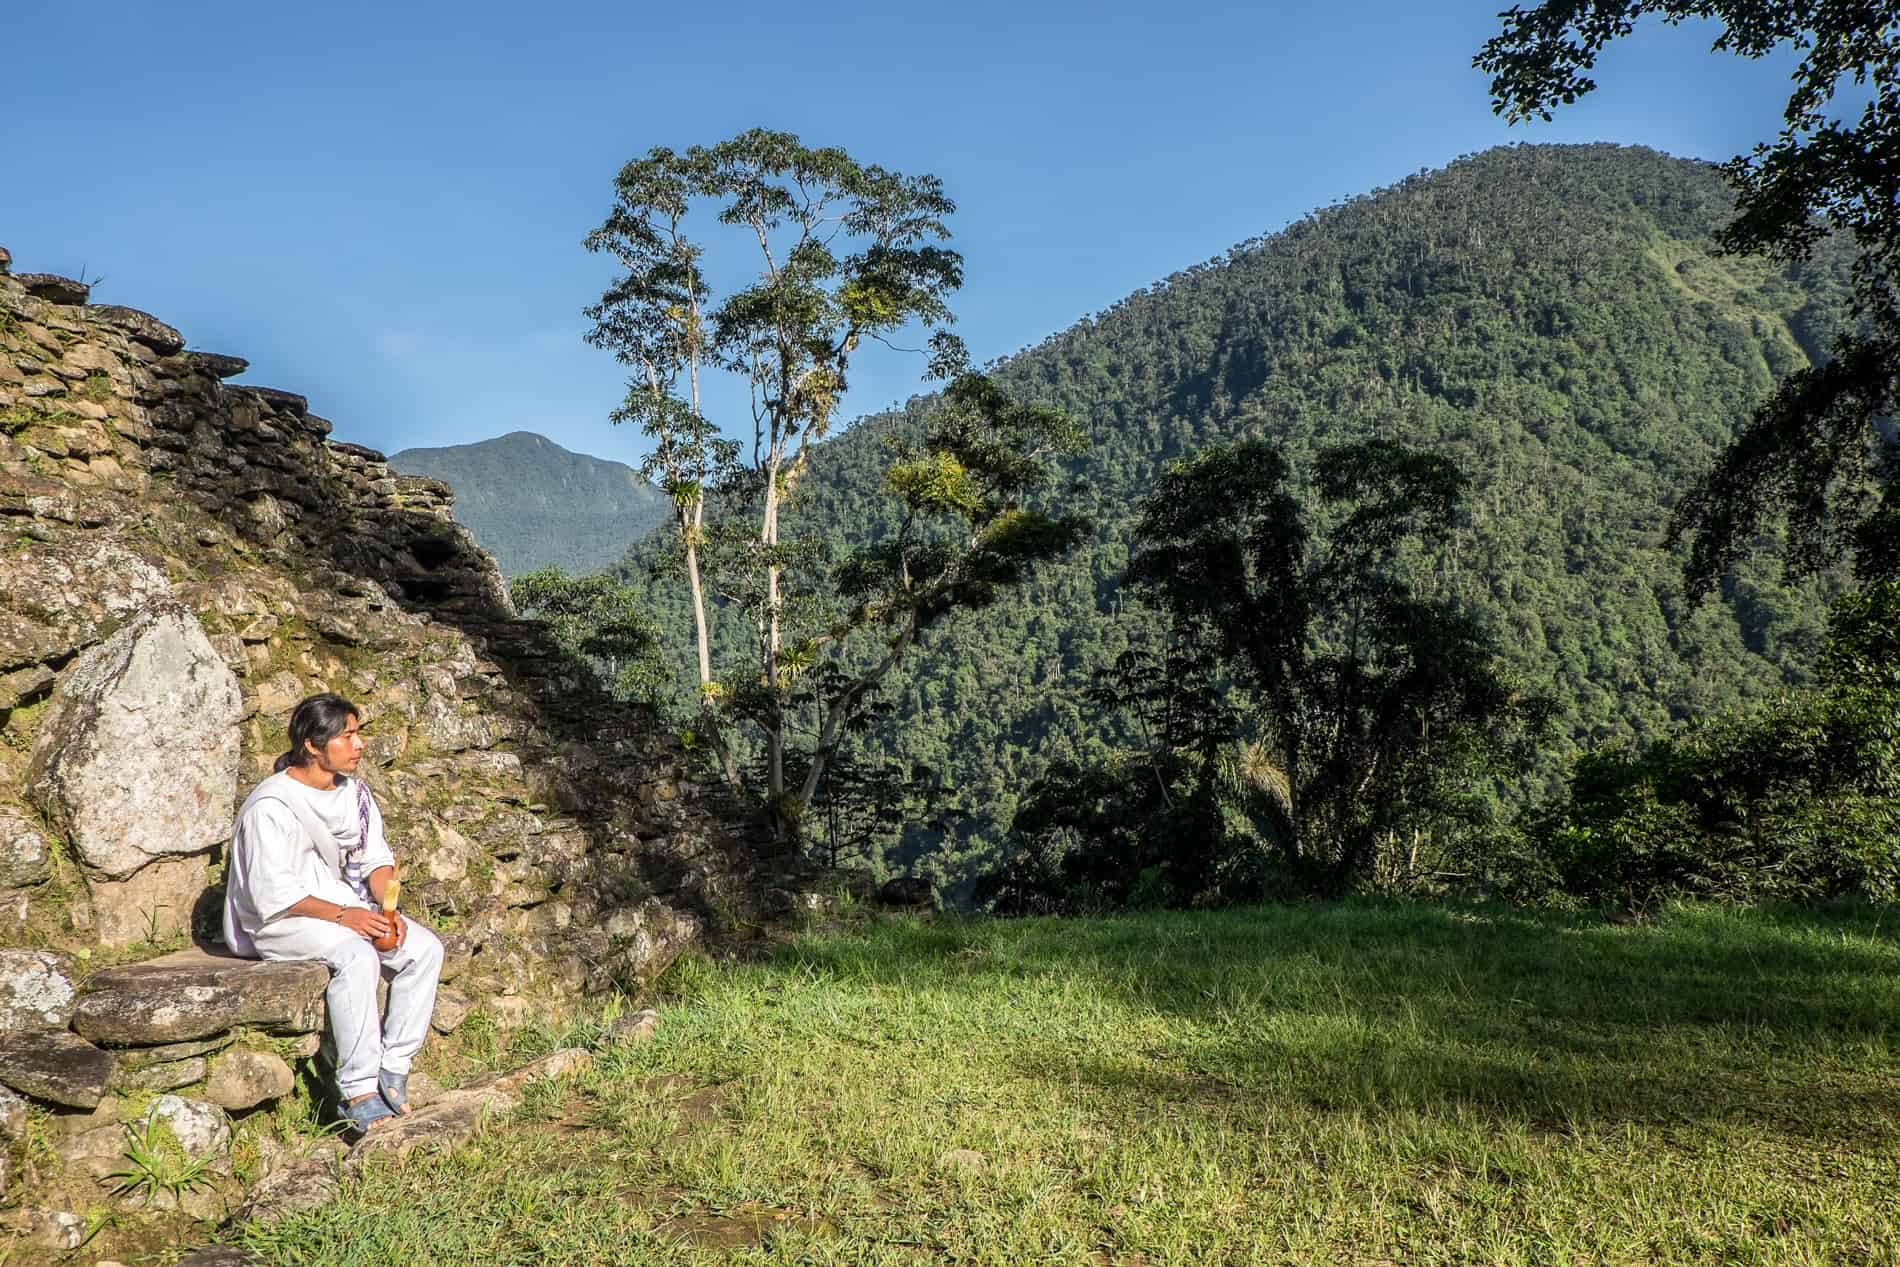 Wiwa indigenous guide sits on the stone ruins of the Lost City Ciudad Perdida in Colombia.